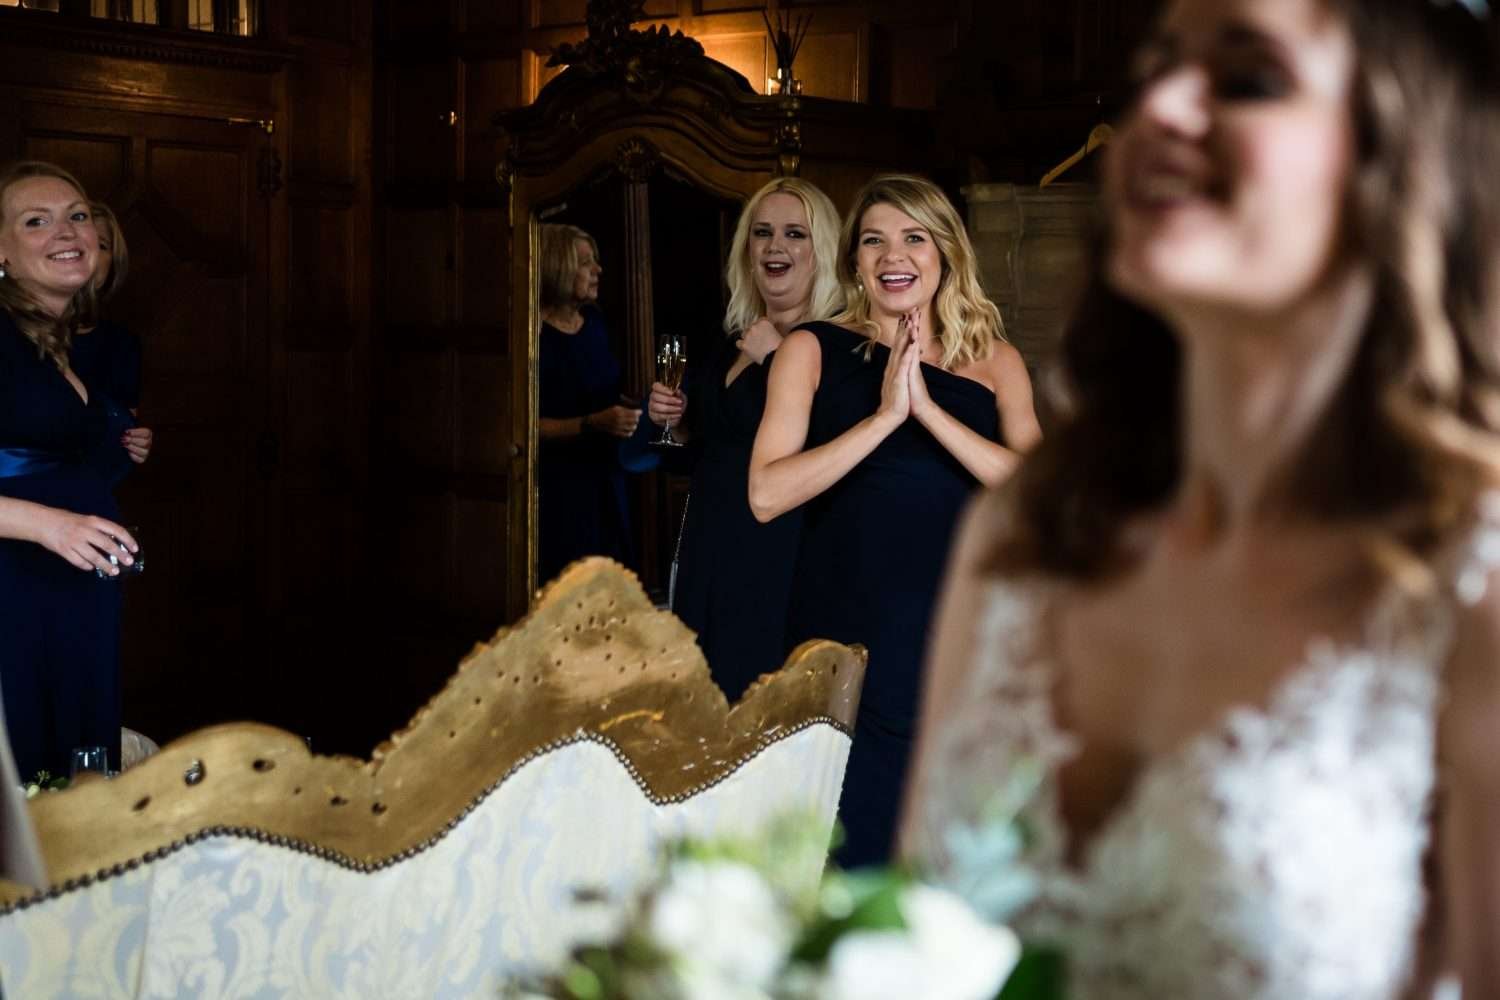 Bridesmaid smile excitedly to see the bride in her dress for the first time. The bride is visible smiling but out of focus in the foreground. 